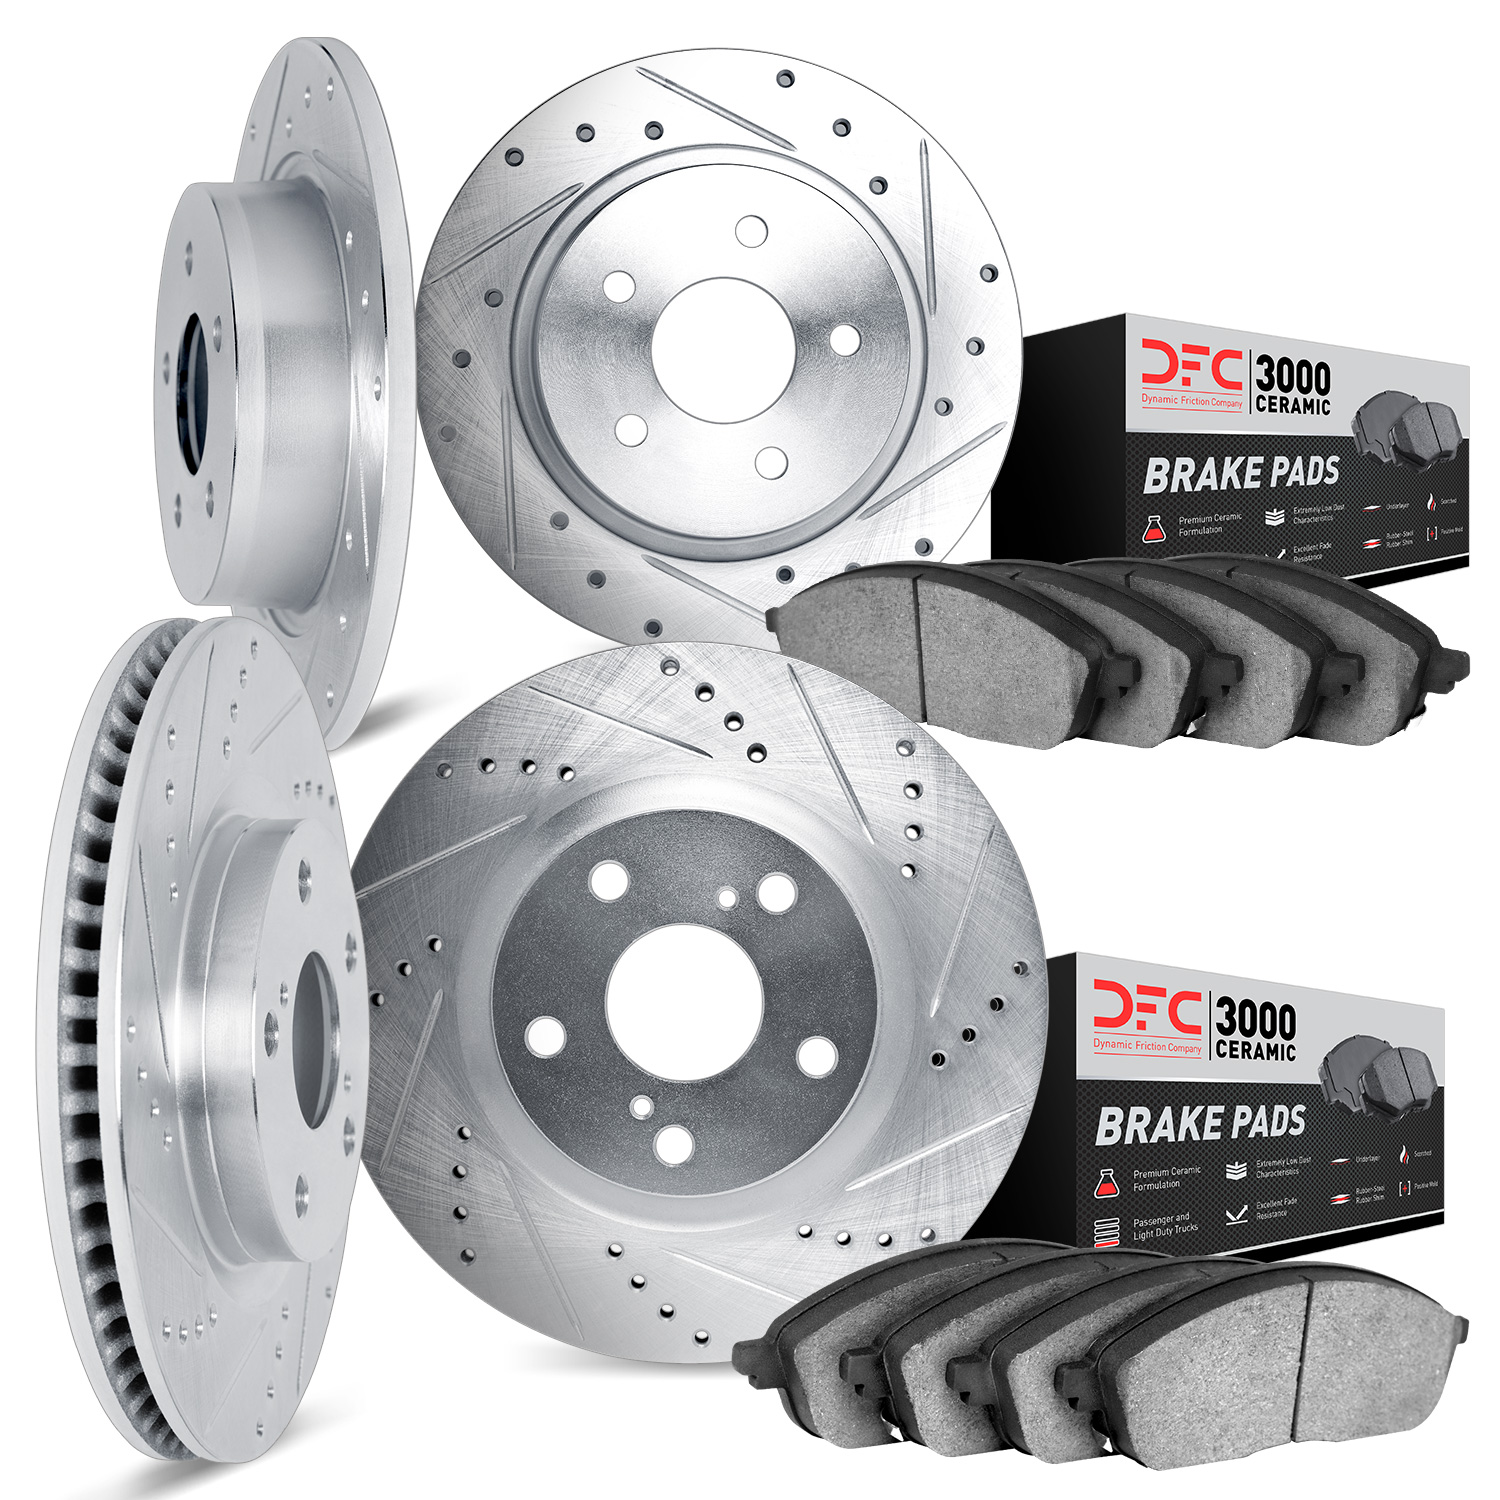 7304-54025 Drilled/Slotted Brake Rotor with 3000-Series Ceramic Brake Pads Kit [Silver], 1995-1998 Ford/Lincoln/Mercury/Mazda, P